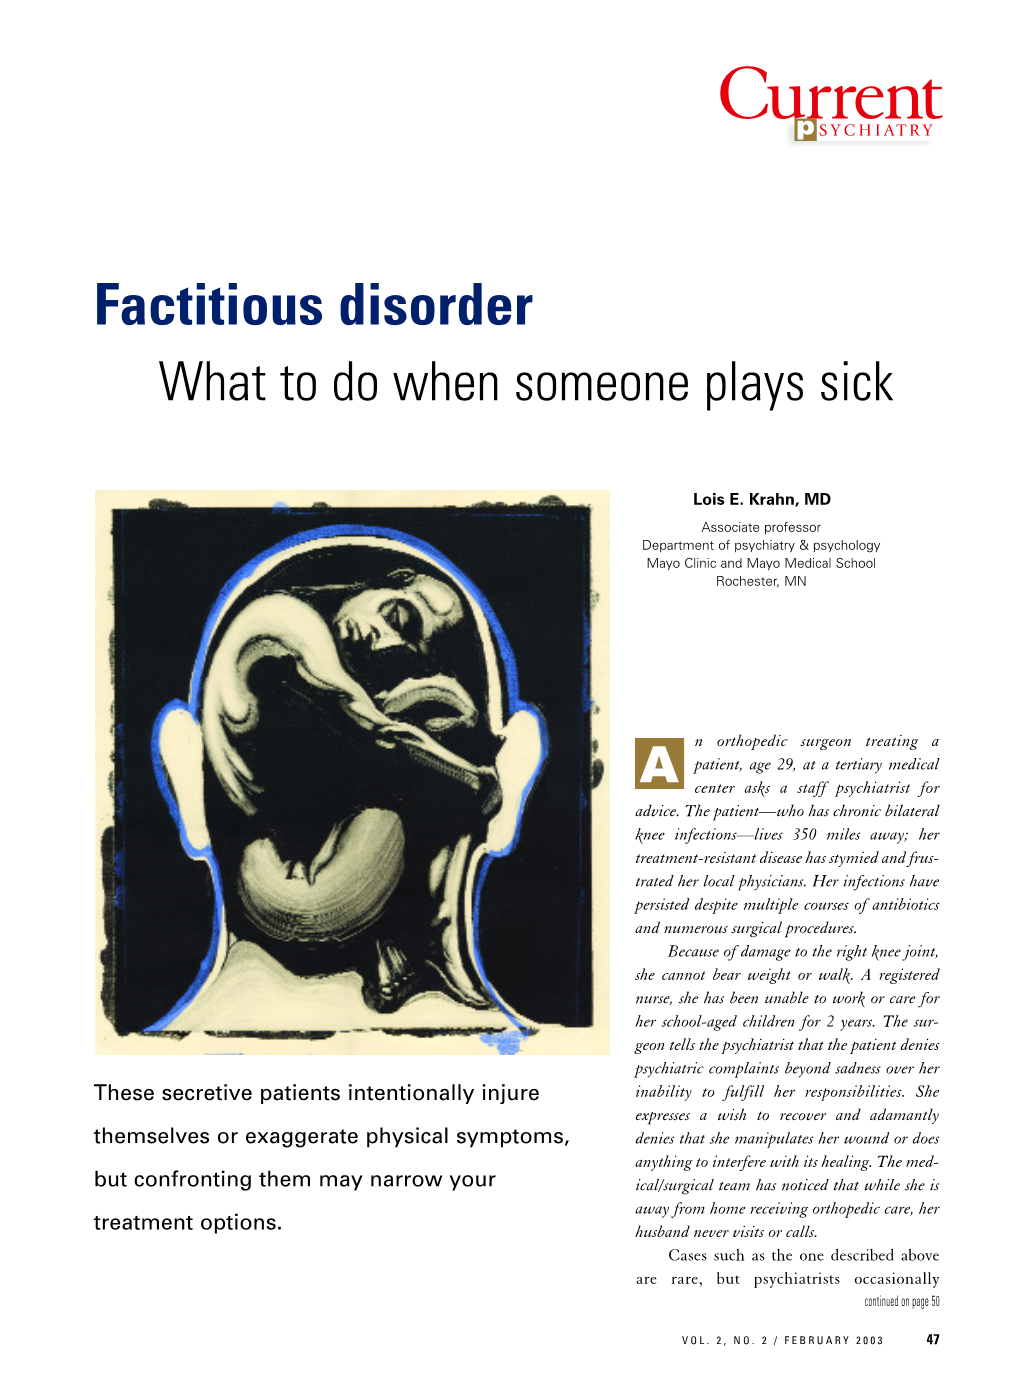 Factitious Disorder What to Do When Someone Plays Sick